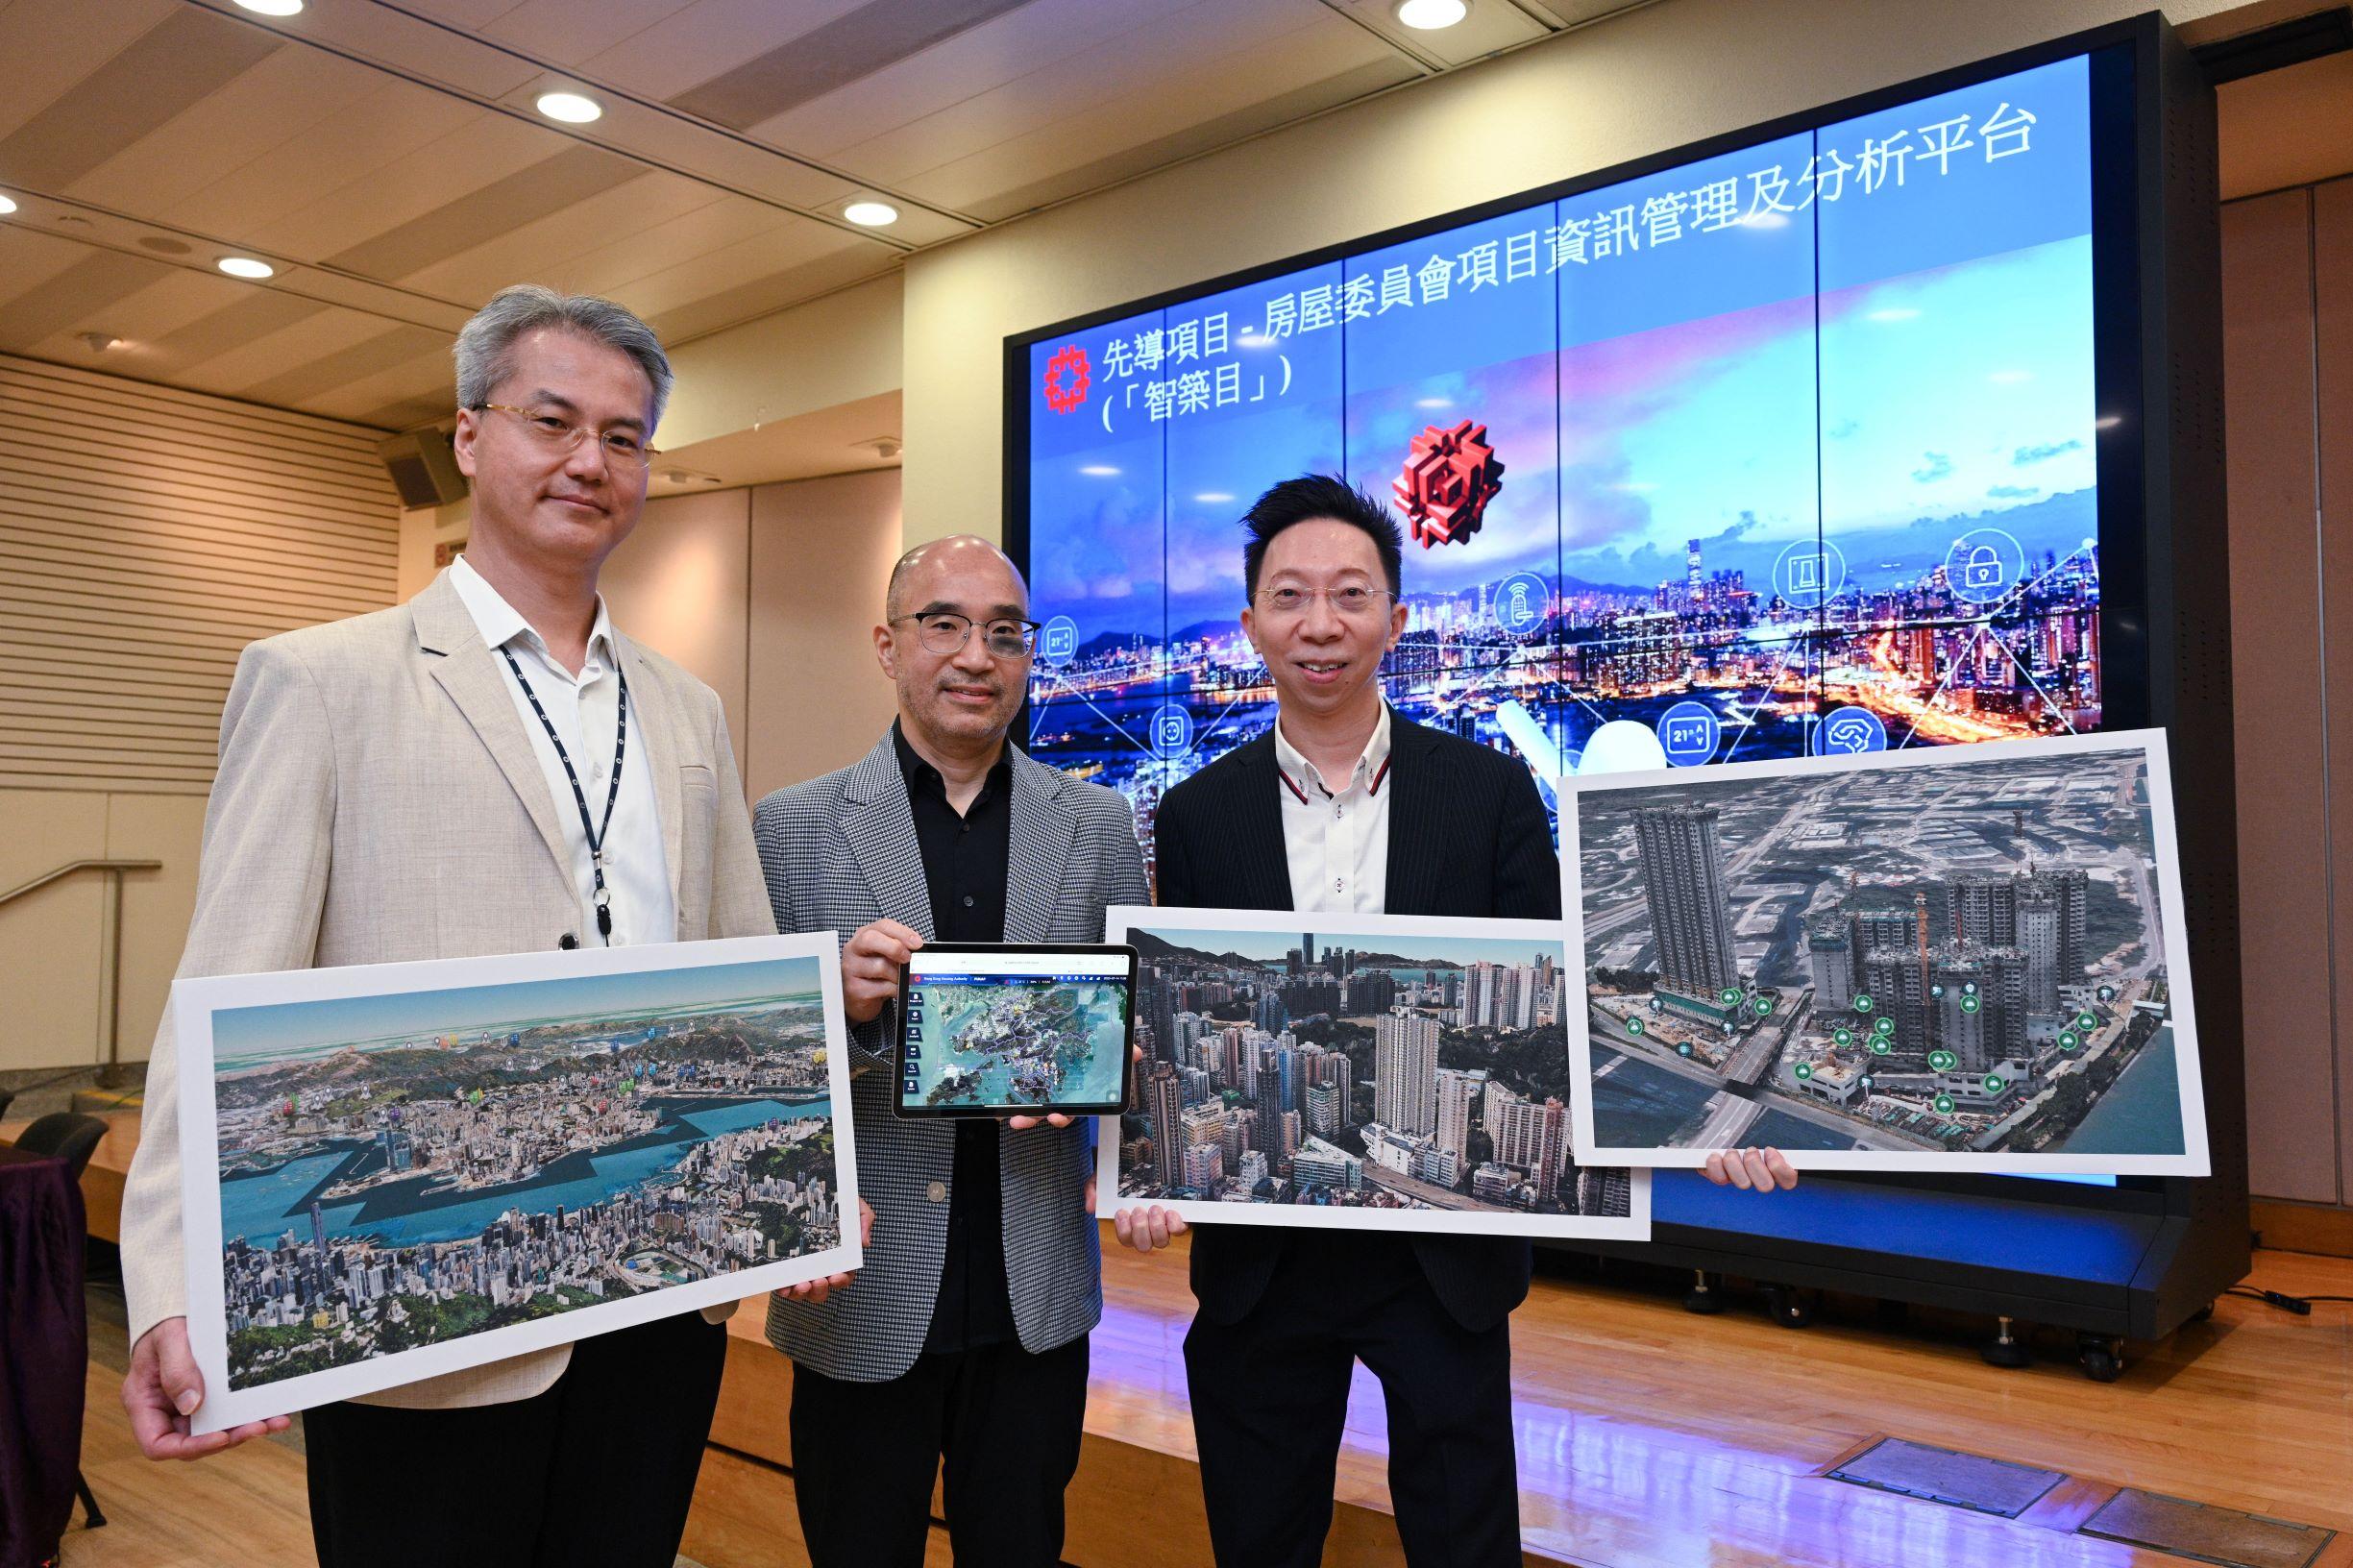 The Hong Kong Housing Authority has developed the Project Information Management and Analytics Platform (HA-PIMAP). Photo shows the Deputy Director of Housing (Development and Construction), Mr Stephen Leung (centre); the Acting Assistant Director of Housing (Development and Procurement), Mr Rayson Wong (left); and the Senior Structural Engineer (Innovation and Technology/Development and Construction), Mr Romeo Yiu (right), at the media briefing.


